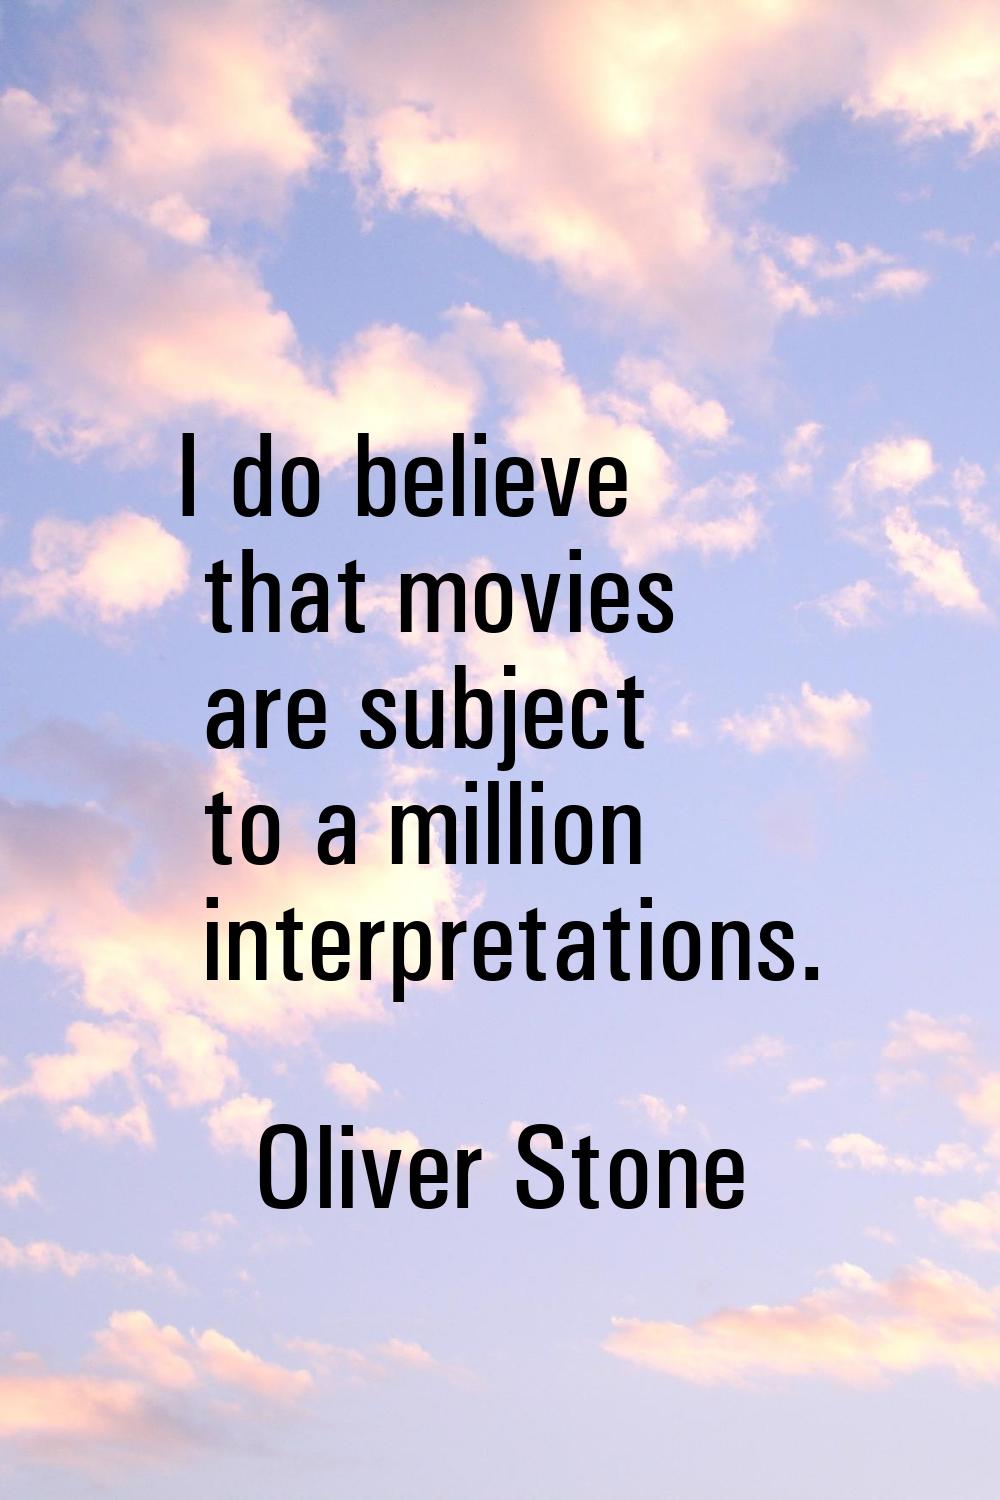 I do believe that movies are subject to a million interpretations.